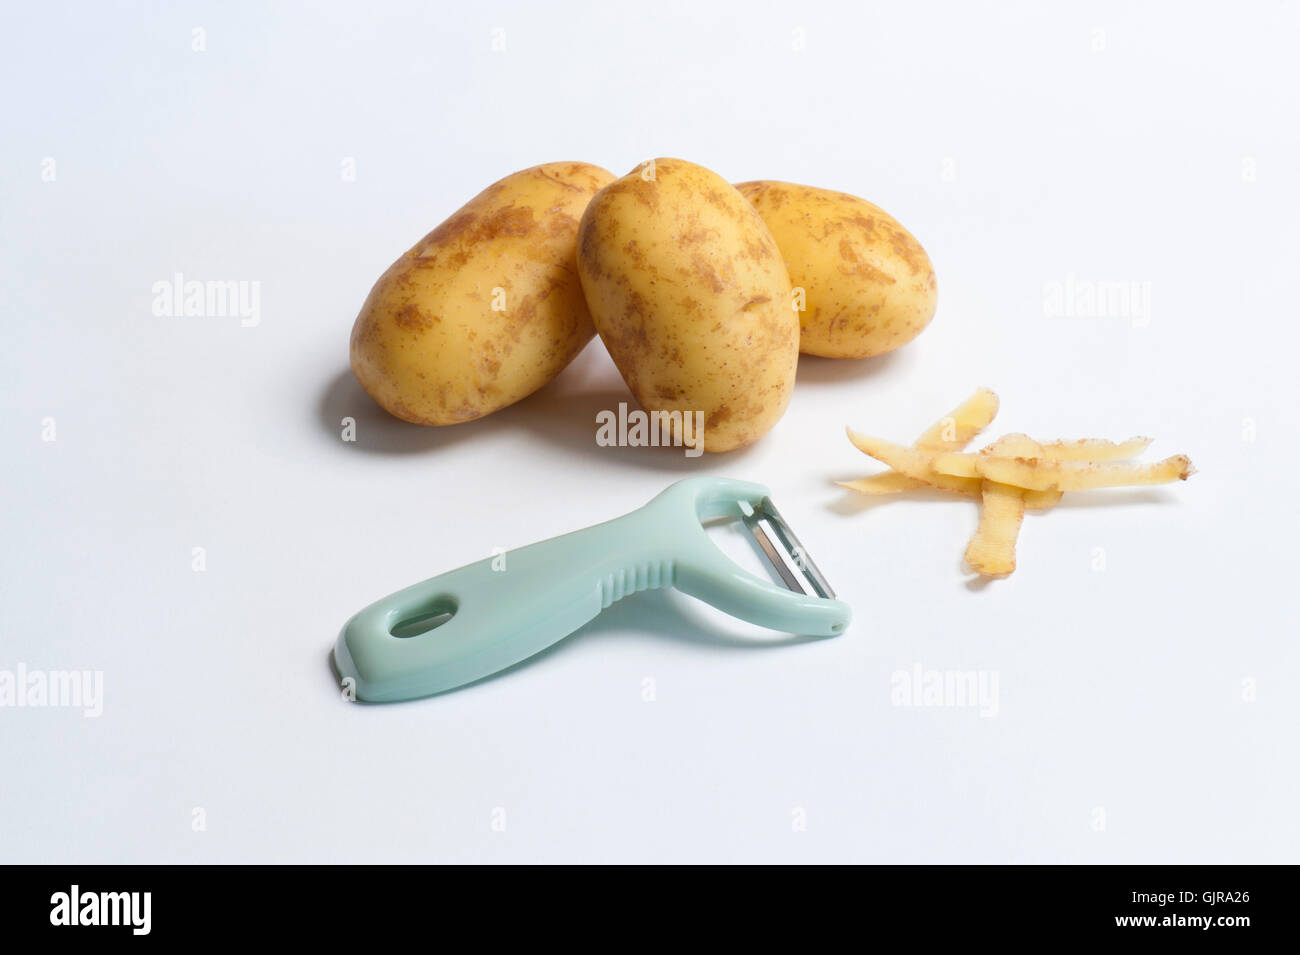 An Electric Potato Peeler On A White Surface Photograph by Jalag